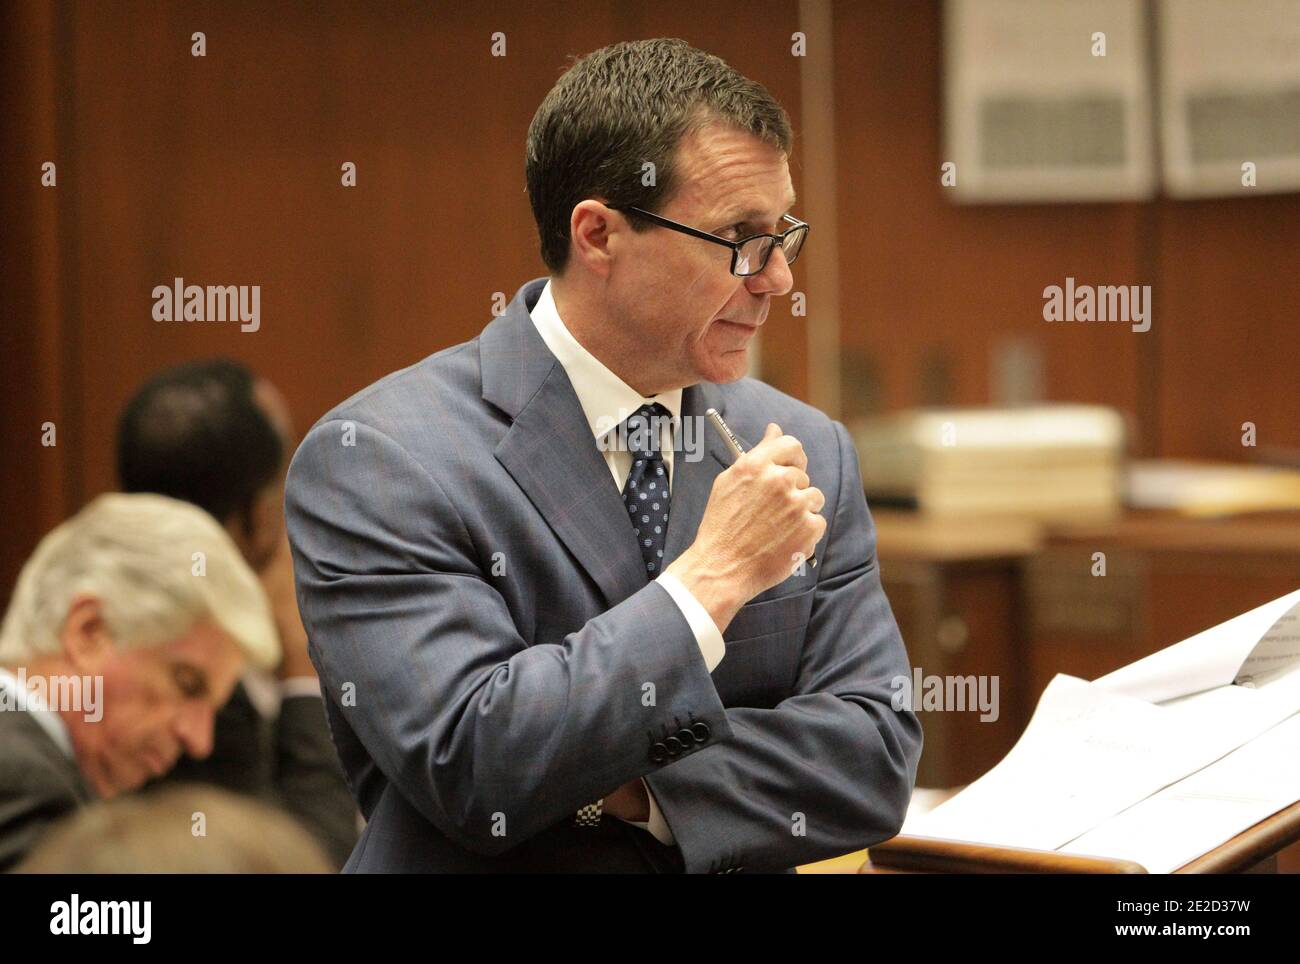 Ed Chernoff, a defense attorney for Dr. Conrad Murray, cross examines anesthesiology expert Dr. Steven Shafer, not pictured, during Murray's involuntary manslaughter trial in Los Angeles, CA, USA, on October 21, 2011. Murray has pleaded not guilty and faces four years in prison and the loss of his medical license if convicted of involuntary manslaughter in Michael Jackson's death. Photo by Reed Saxon/Pool/ABACAPRESS.COM Stock Photo